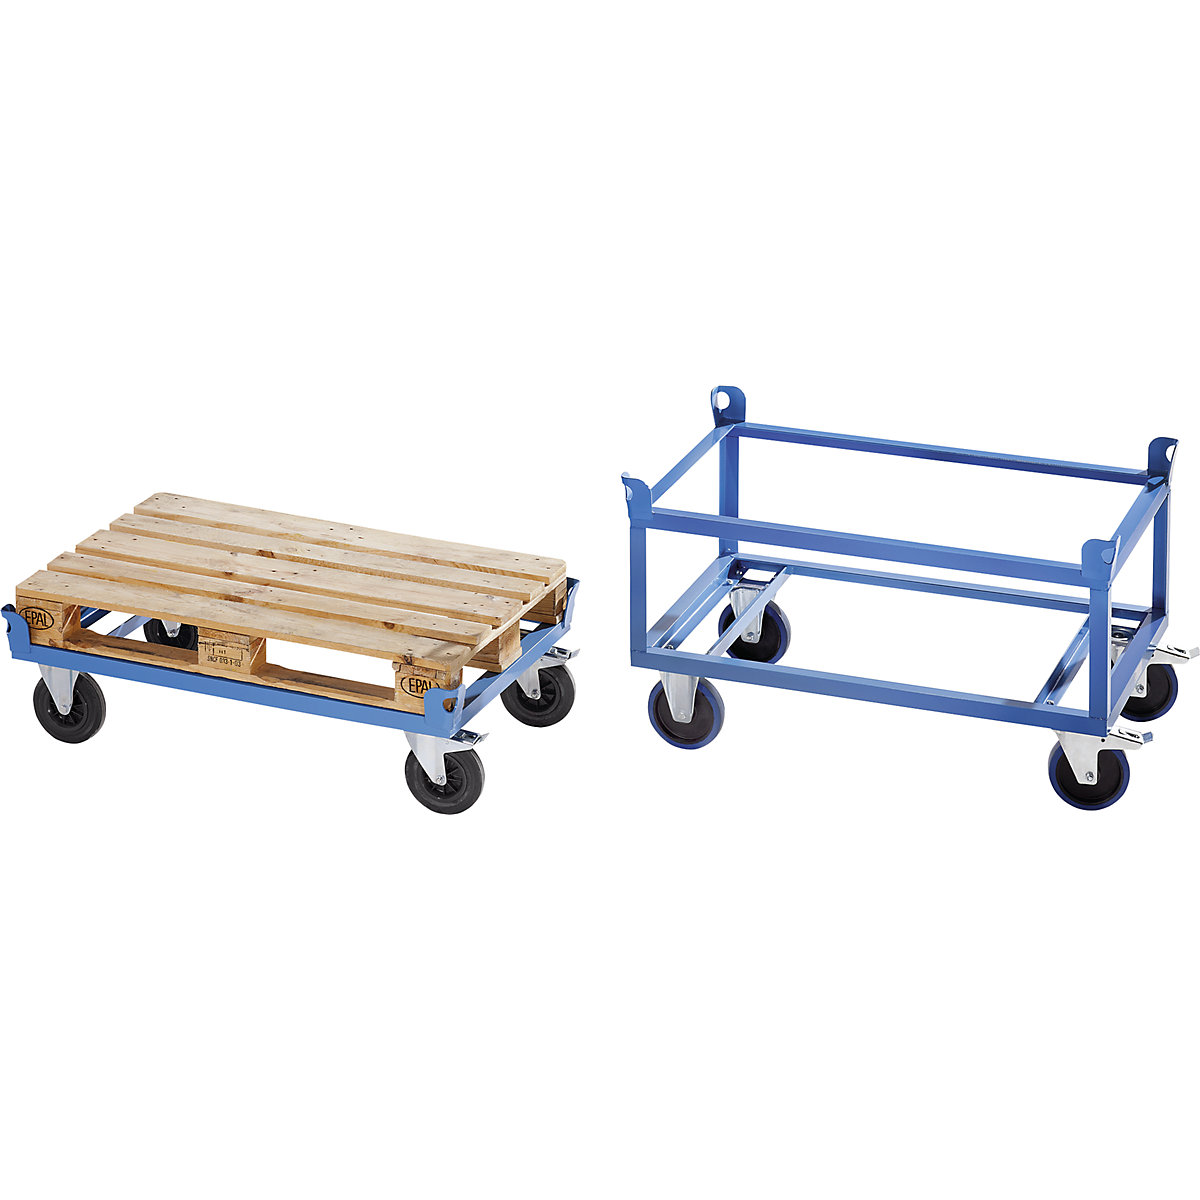 Steel wheeled base – eurokraft pro, for Euro pallets, max. load 500 kg, loading height 650 mm, blue, 5+ items-1